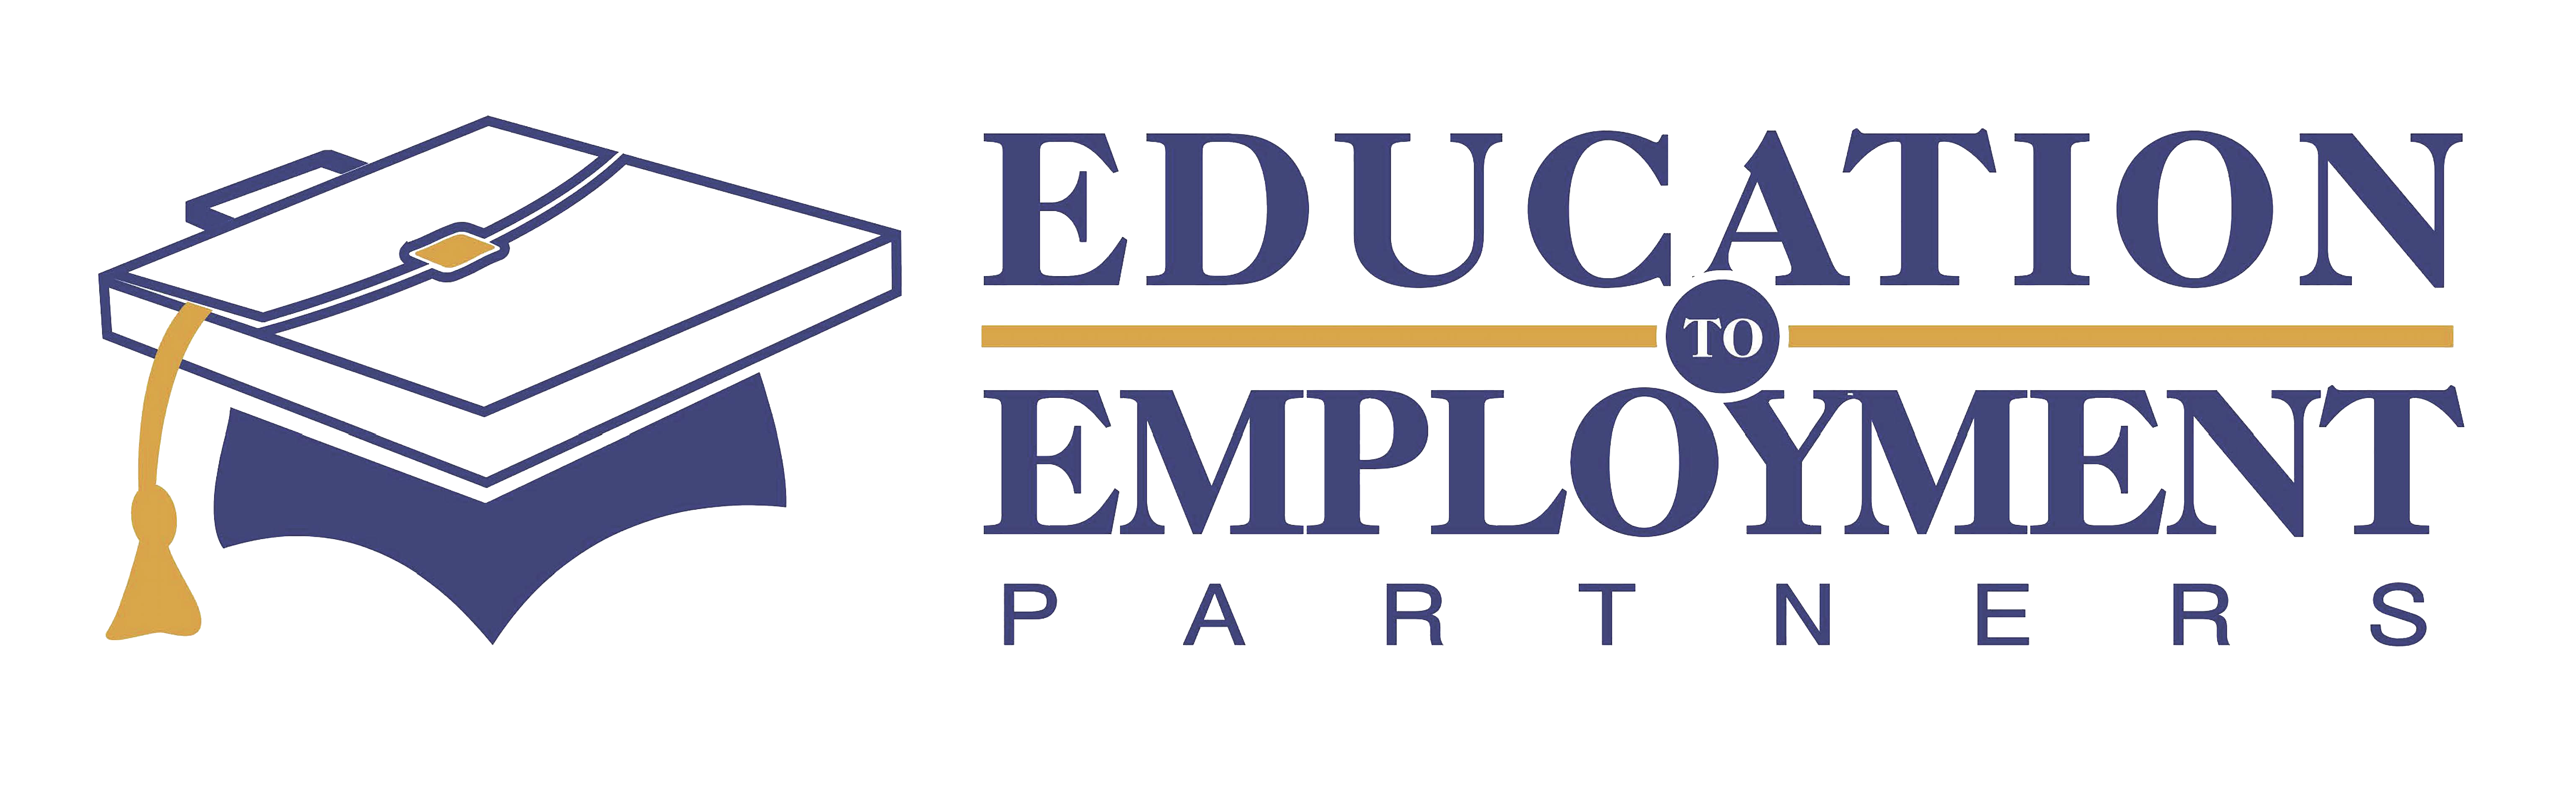 Education to Employment Partners